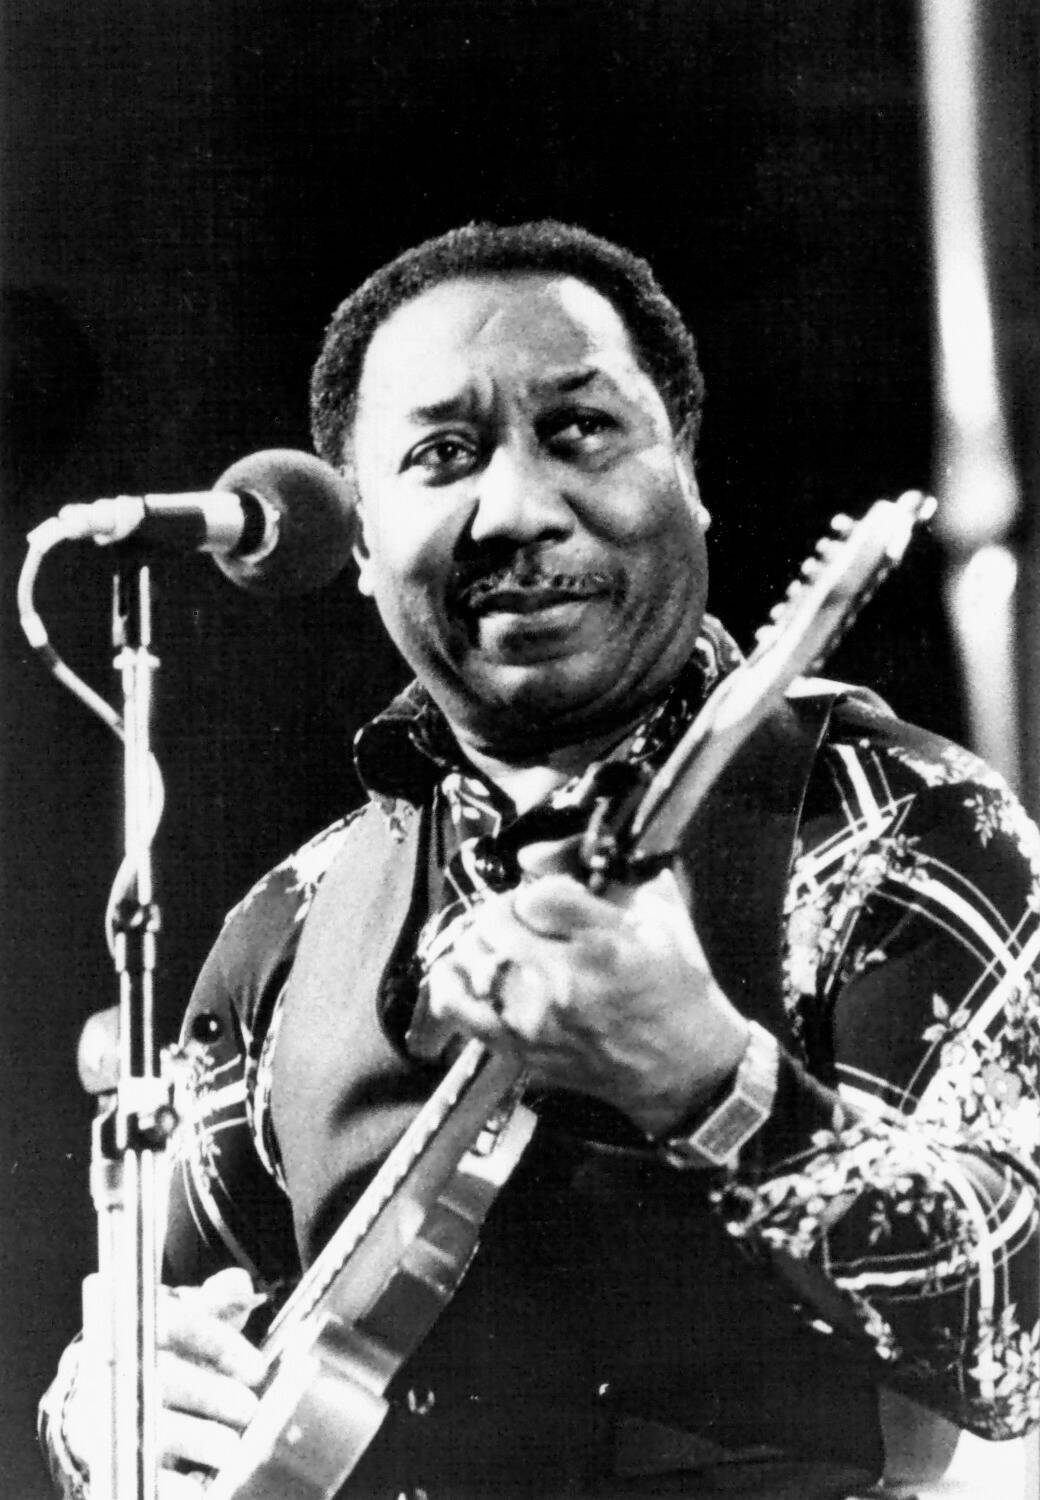 The Muddy Waters Tribute Show